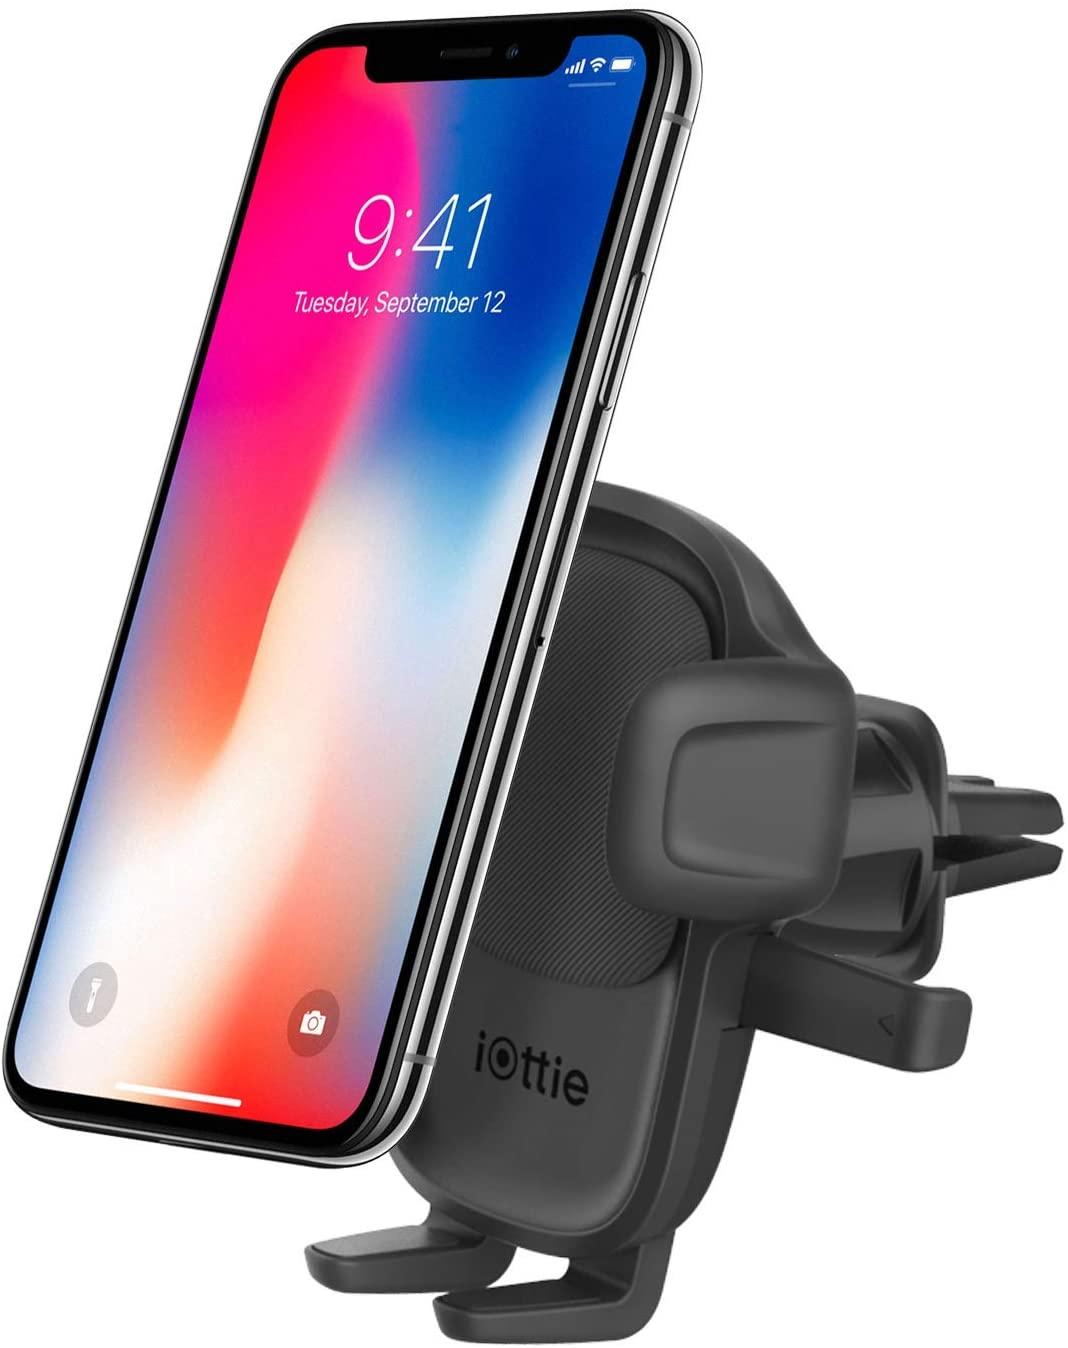 iottie easy one touch 5 universal air vent mount premium ac vent phone holder for iphone 11 pro max 11 pro 11 xr xs max xs x 8 plus samsung huawei devices up to 6 3 screen size